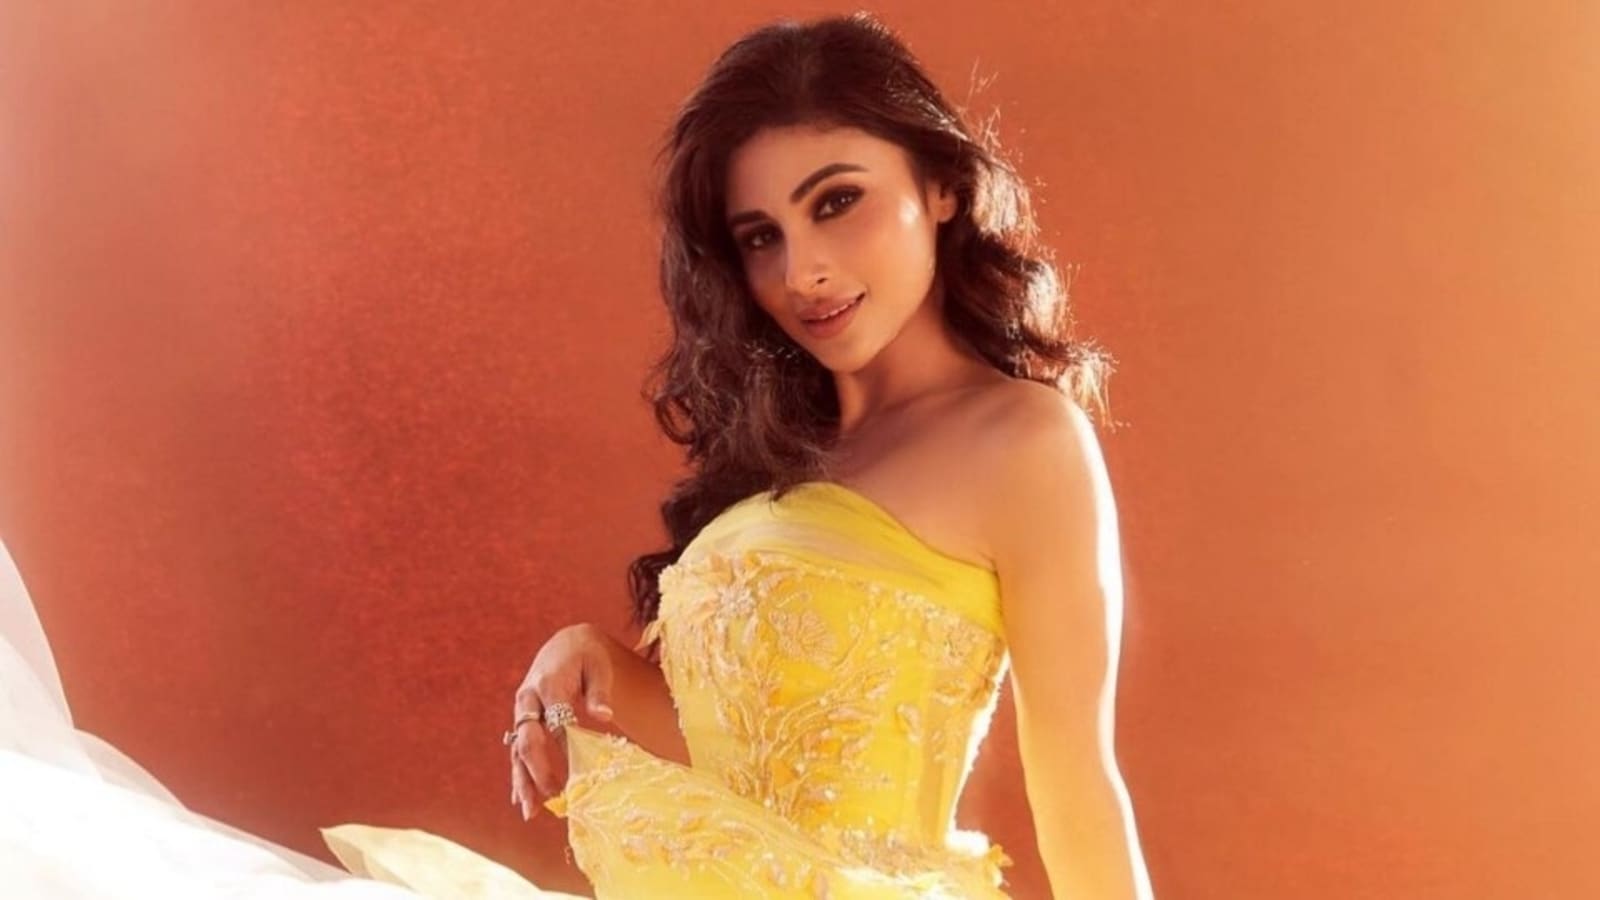 Mouni Roy Looks Oh So Pretty In Sunshine Yellow Gown Worth ₹1 Lakh: See Pics